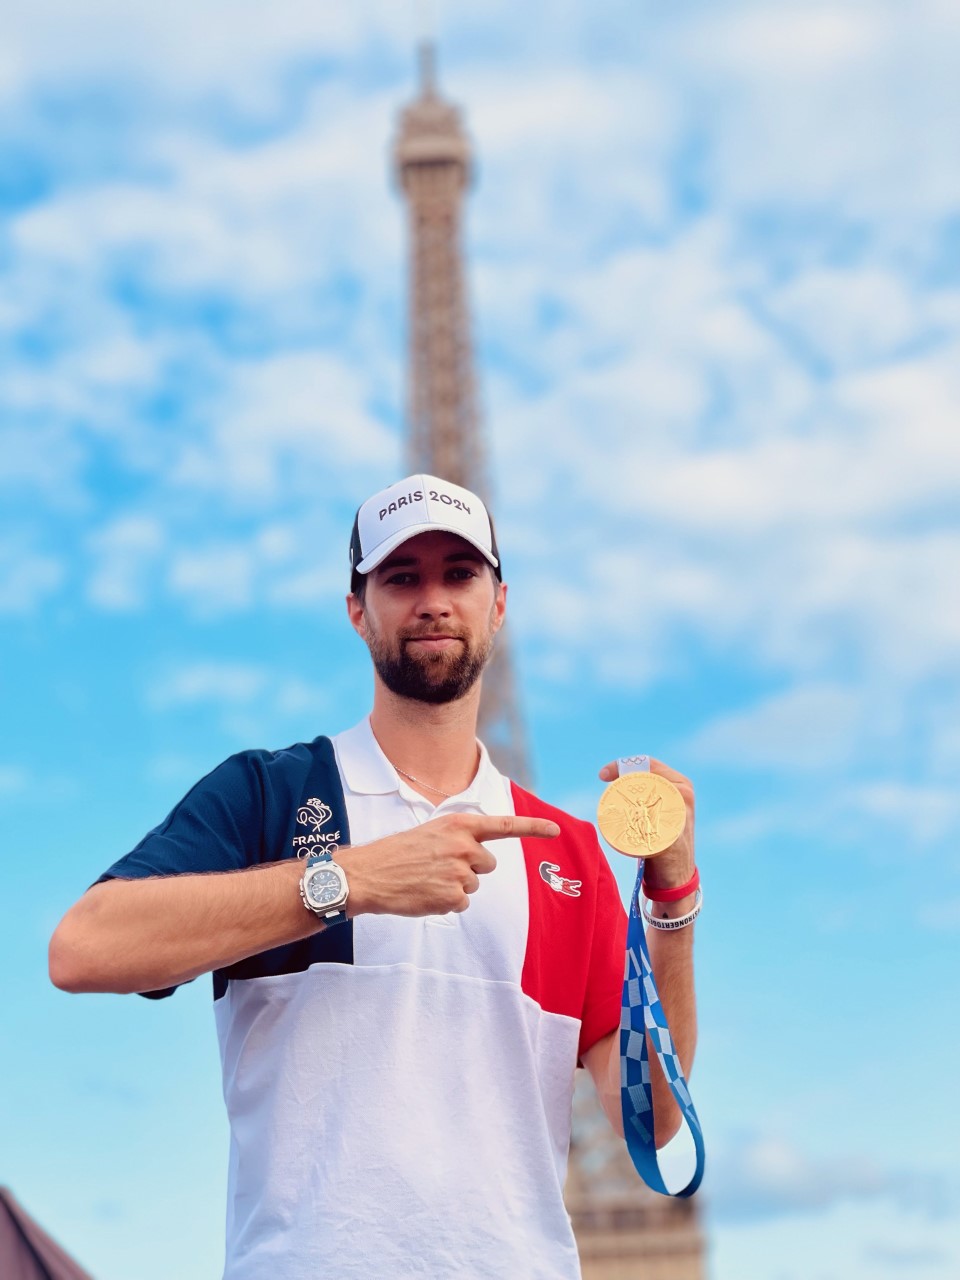 Man with beard and a cap holds up his gold medal in front of the Eiffel Tower -- Kévin Tillie courtesy photo